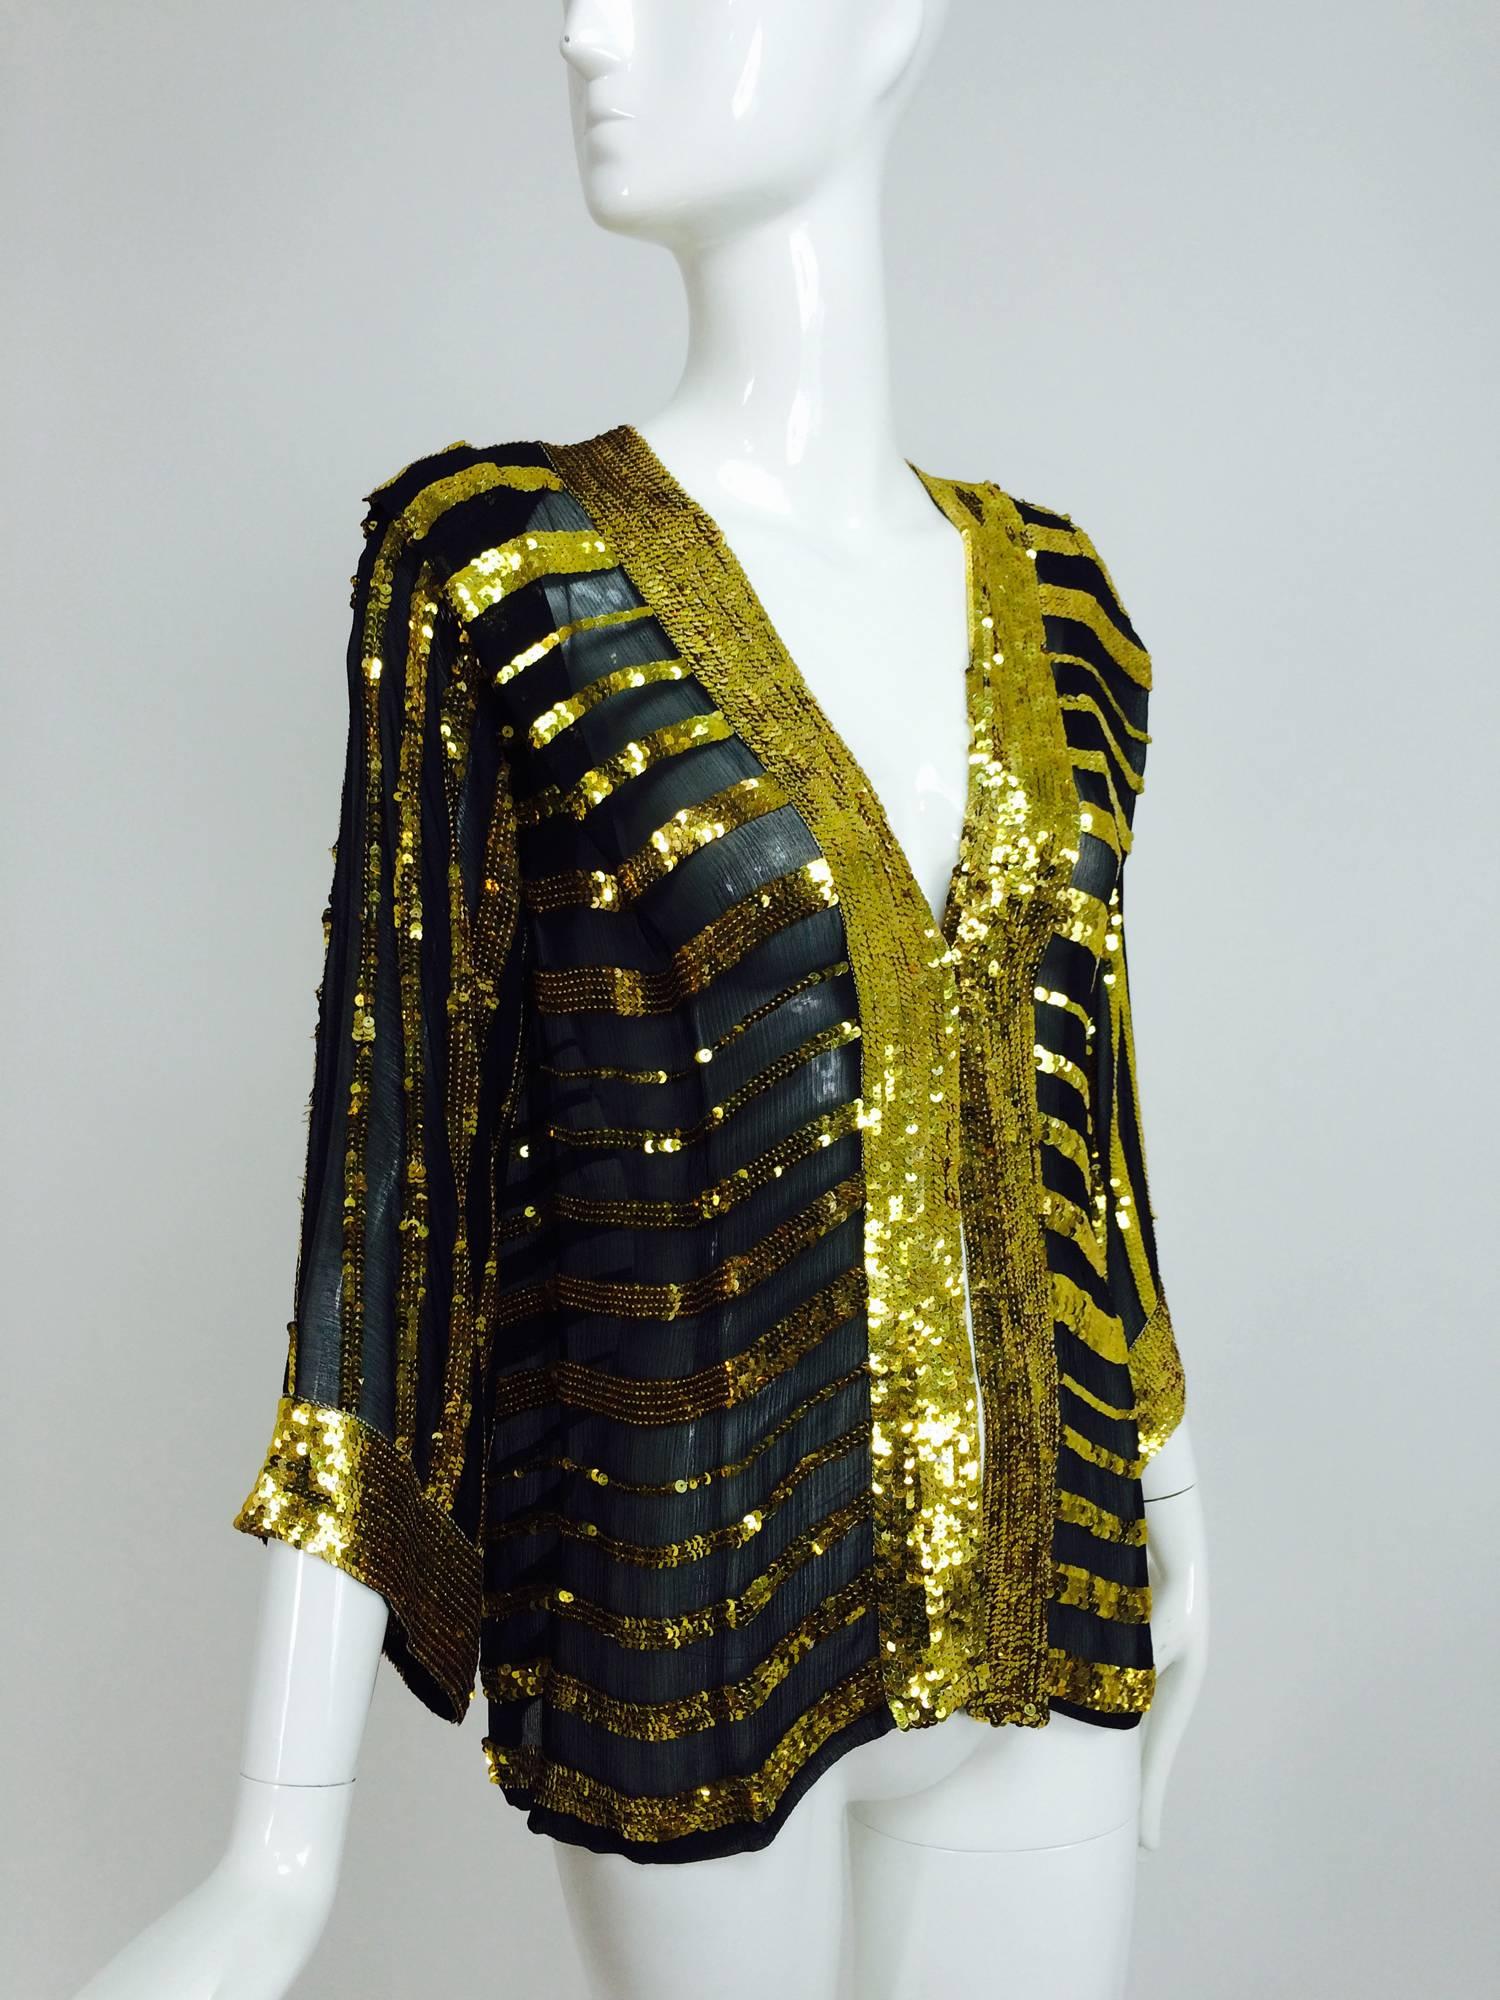 
From the late 1970s a Sweelo black silk chiffon kimono style jacket with horizontal bands of bright gold sequins...The front facings and jacket cuffs all have a wide band of sequins...Open front jacket, unlined...Unworn...Fits like a size